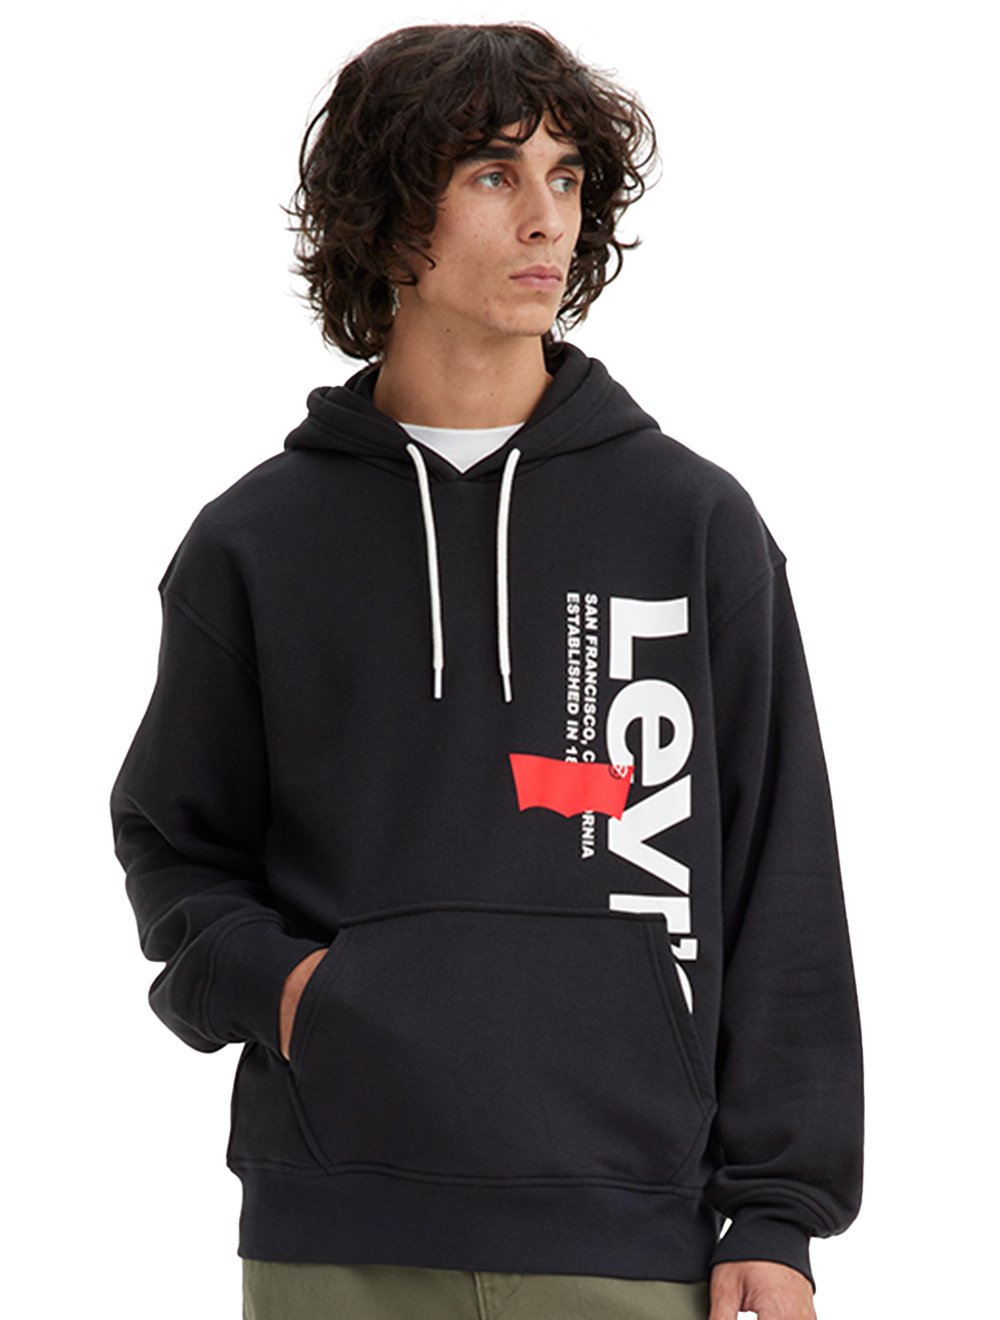 Moletom Levis Masculino Relaxed Graphic Hoodie Preto